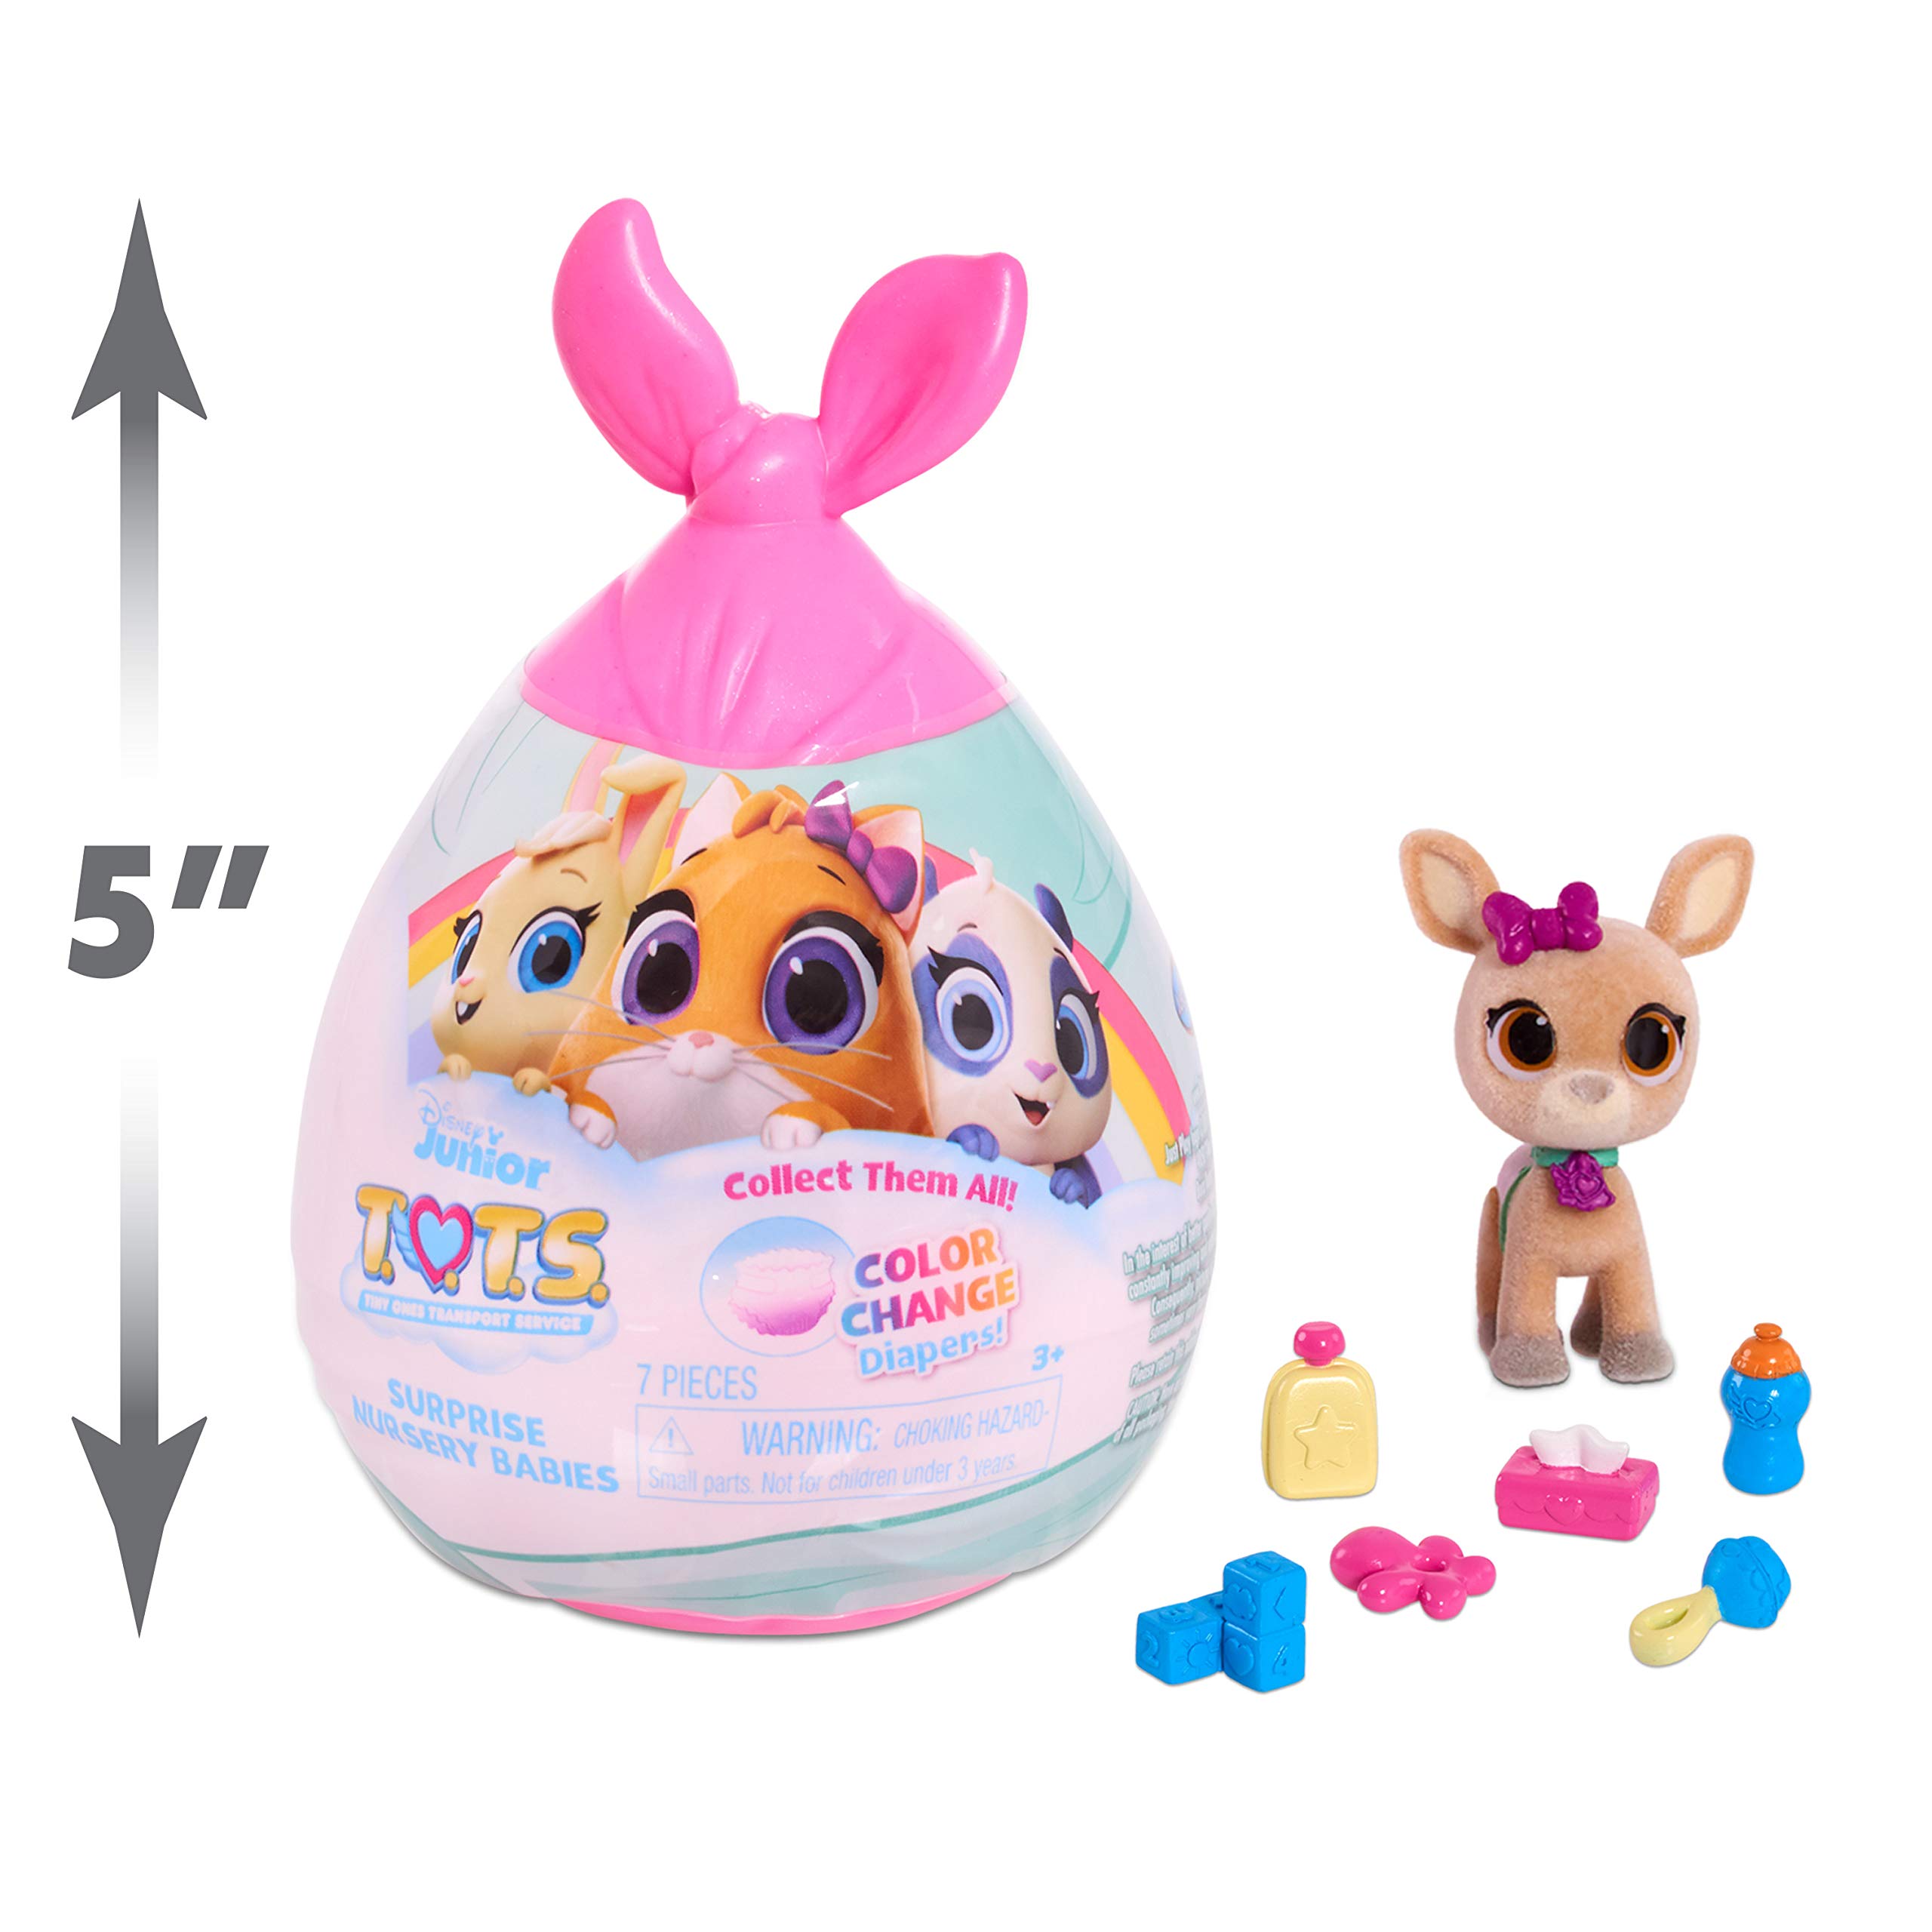 Disney Jr T.O.T.S. Surprise Nursery Babies, Series 2, Officially Licensed Kids Toys for Ages 3 Up by Just Play